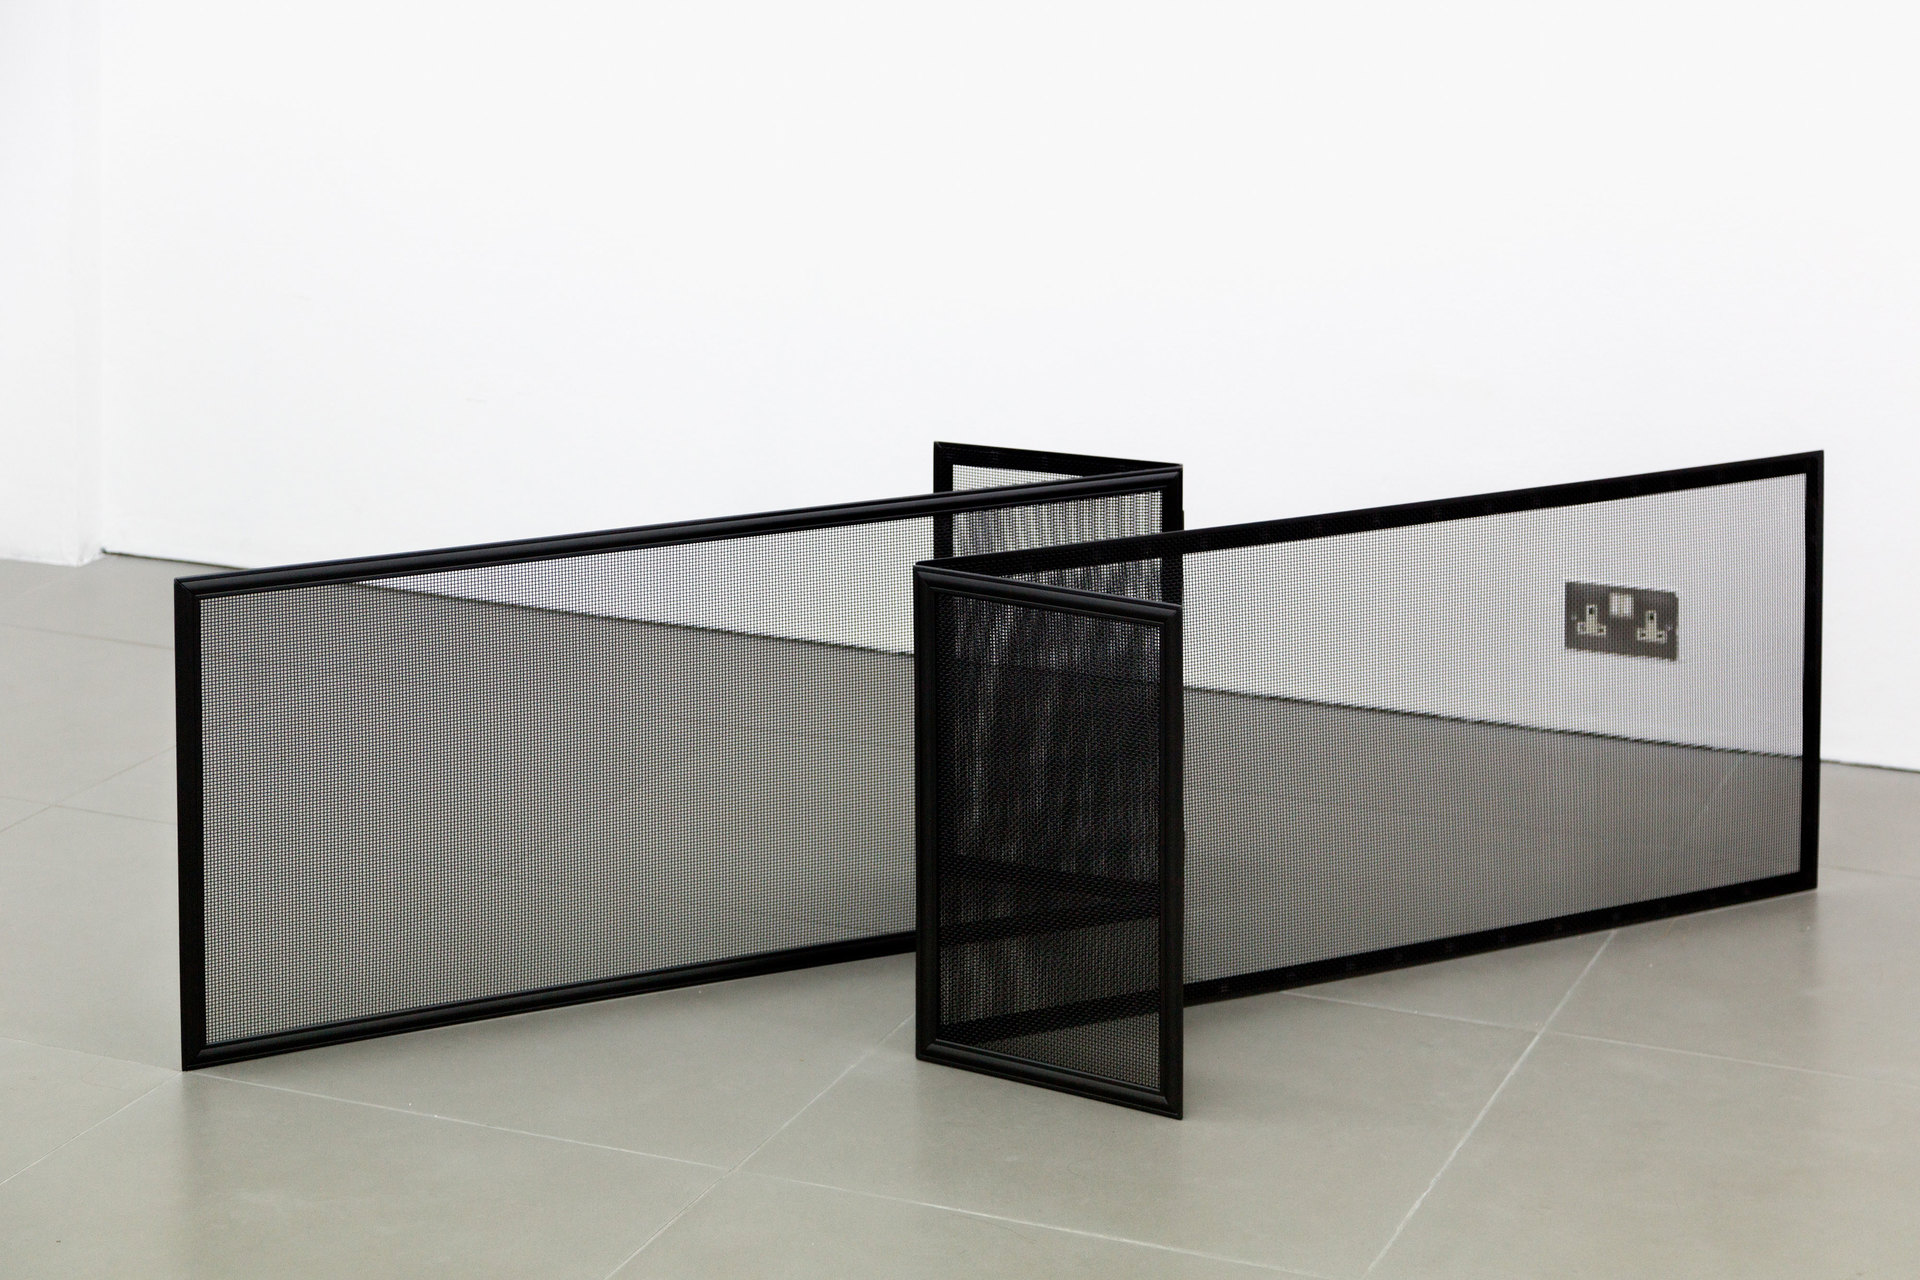 Marte Eknæs, Reboot Horizon, 'Affected Atmosphere', 2012, fireplace screens, Cell Project Space